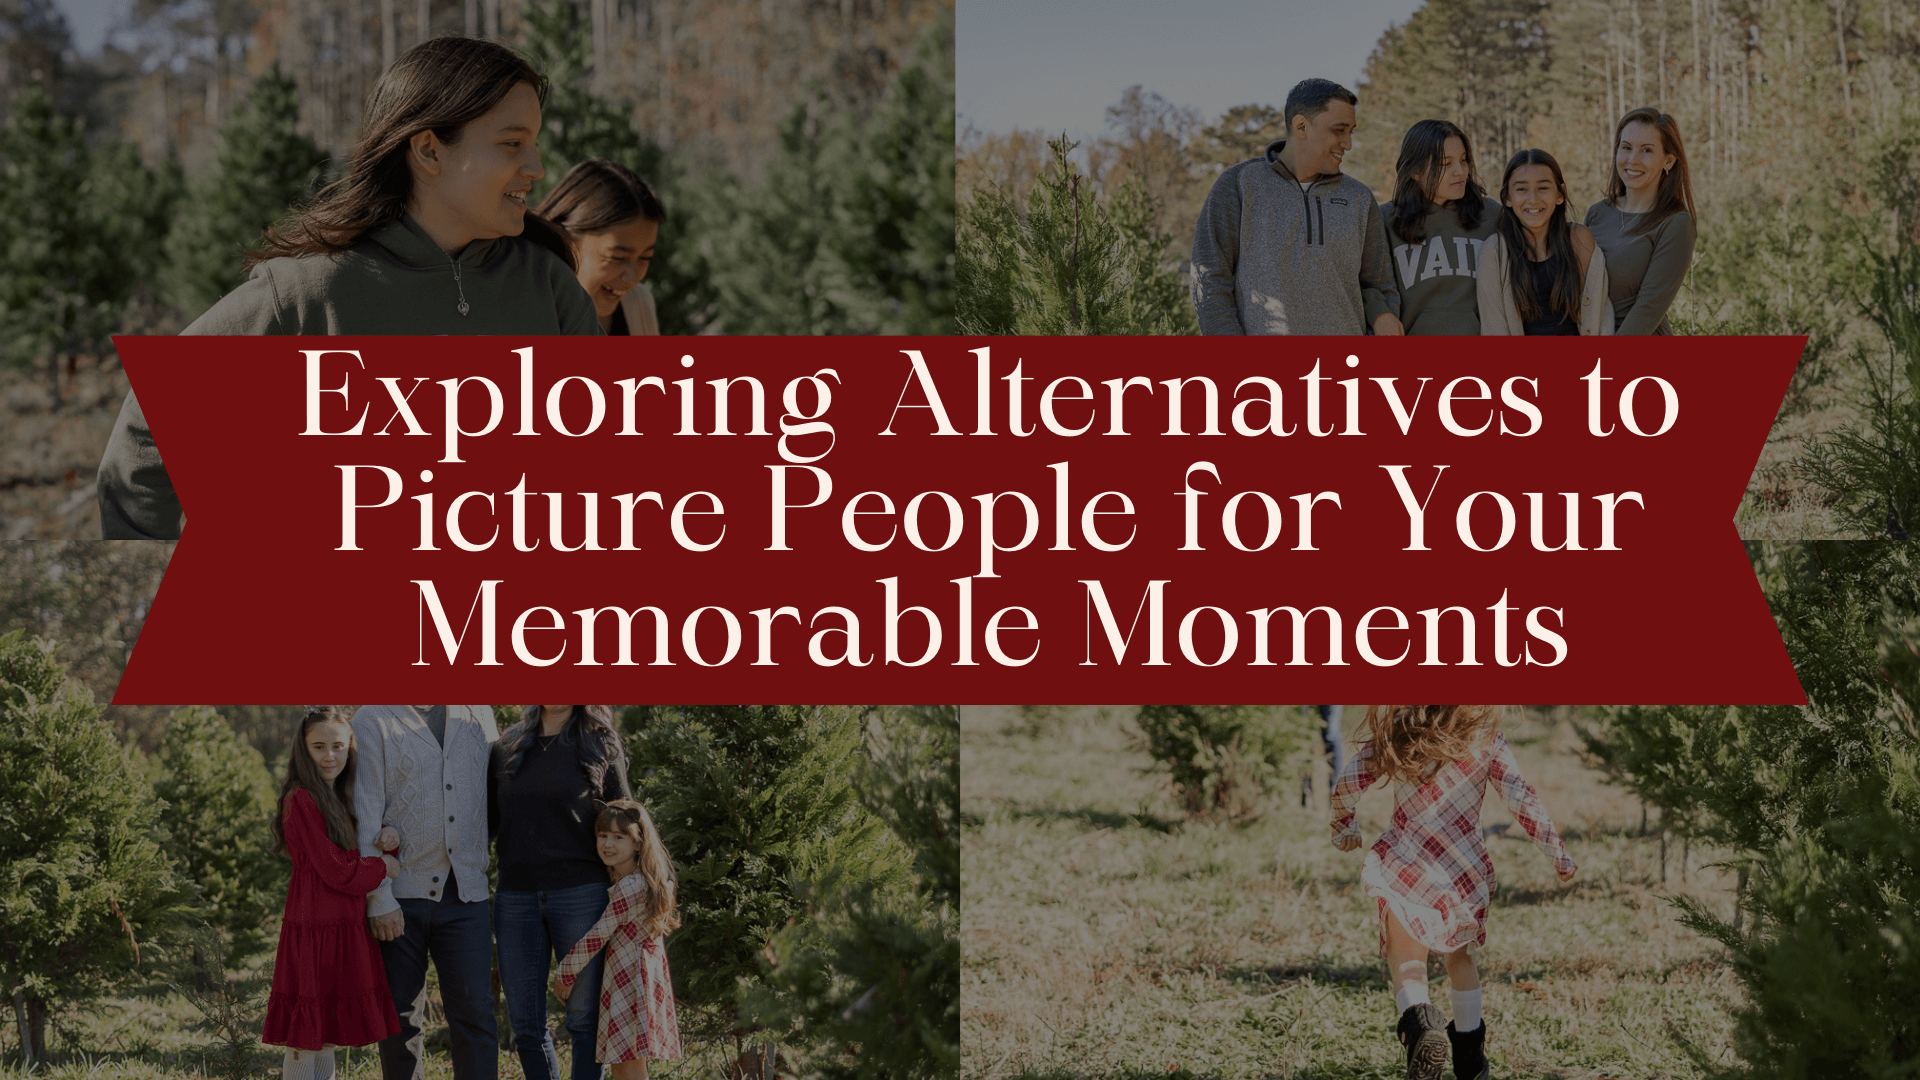 Picture people. Image that includes four images of family photo sessions at a tree farm. The center runs a banner that says exploring alternatives to picture people for your memorable moments.